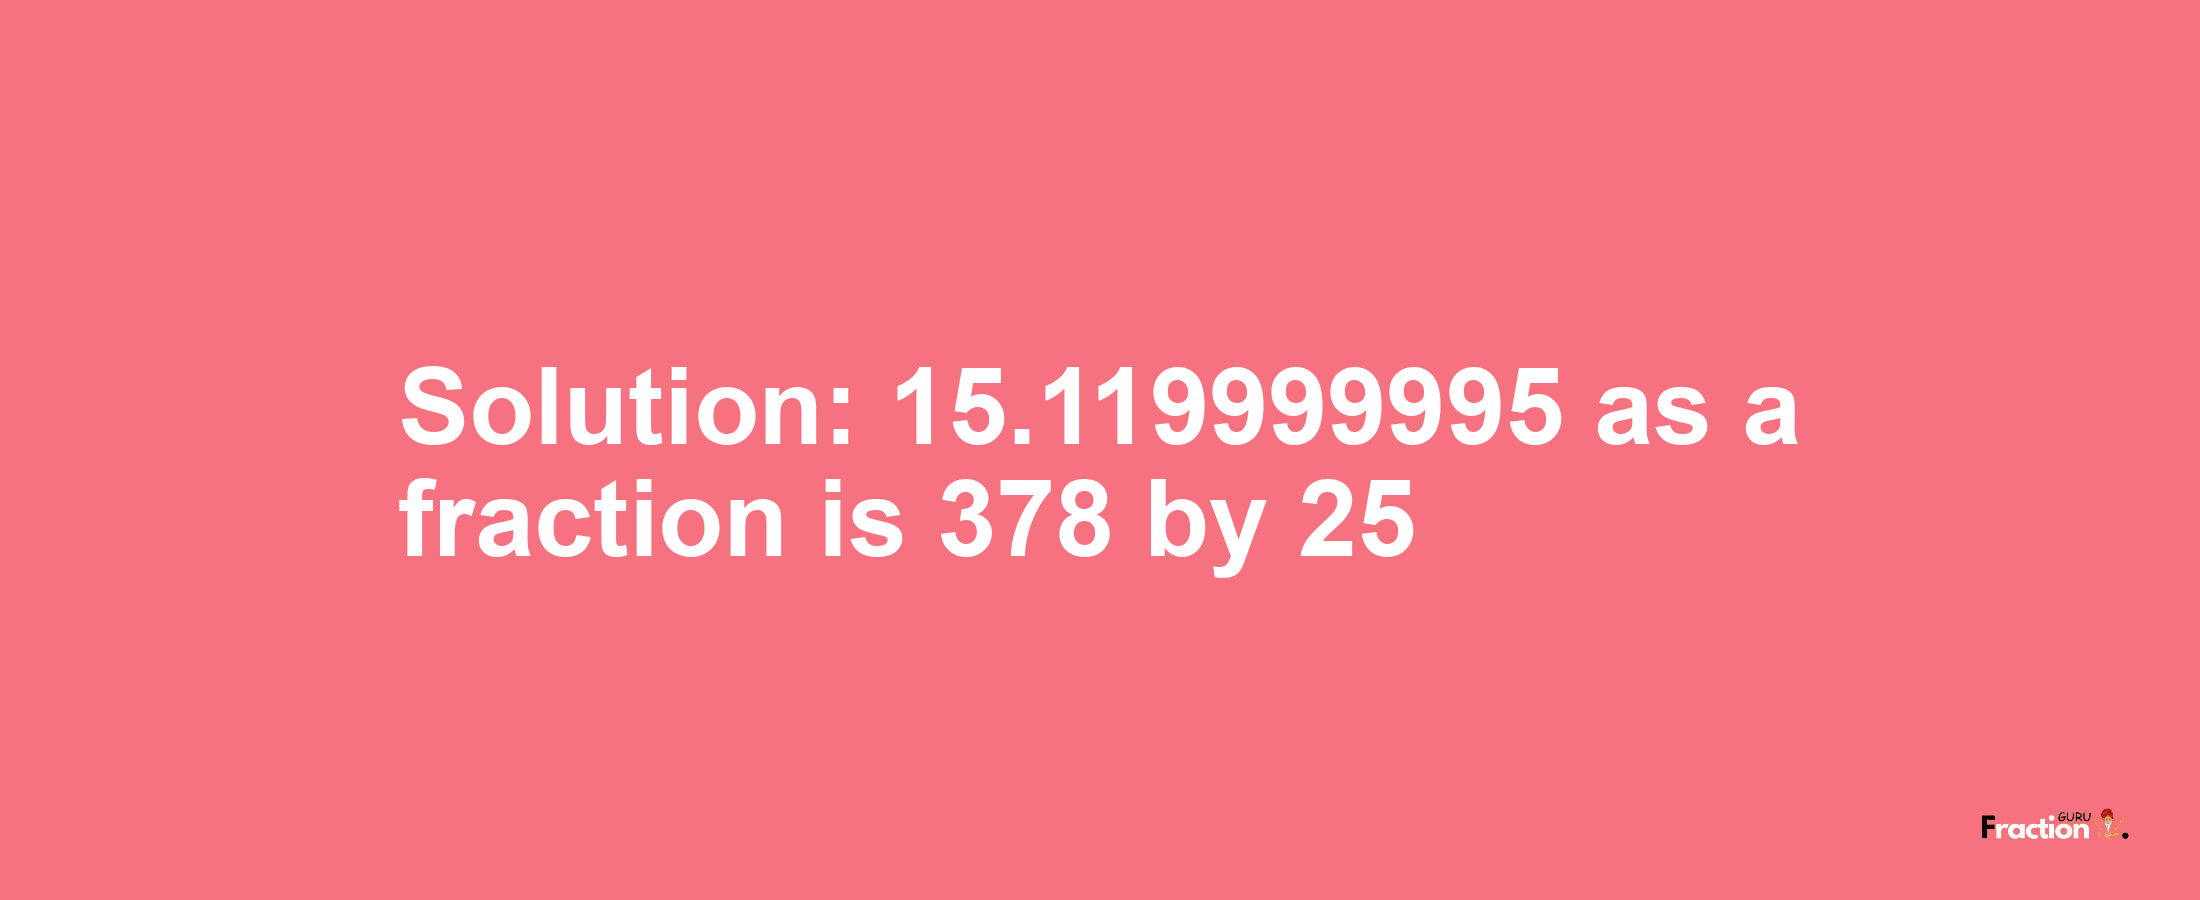 Solution:15.119999995 as a fraction is 378/25